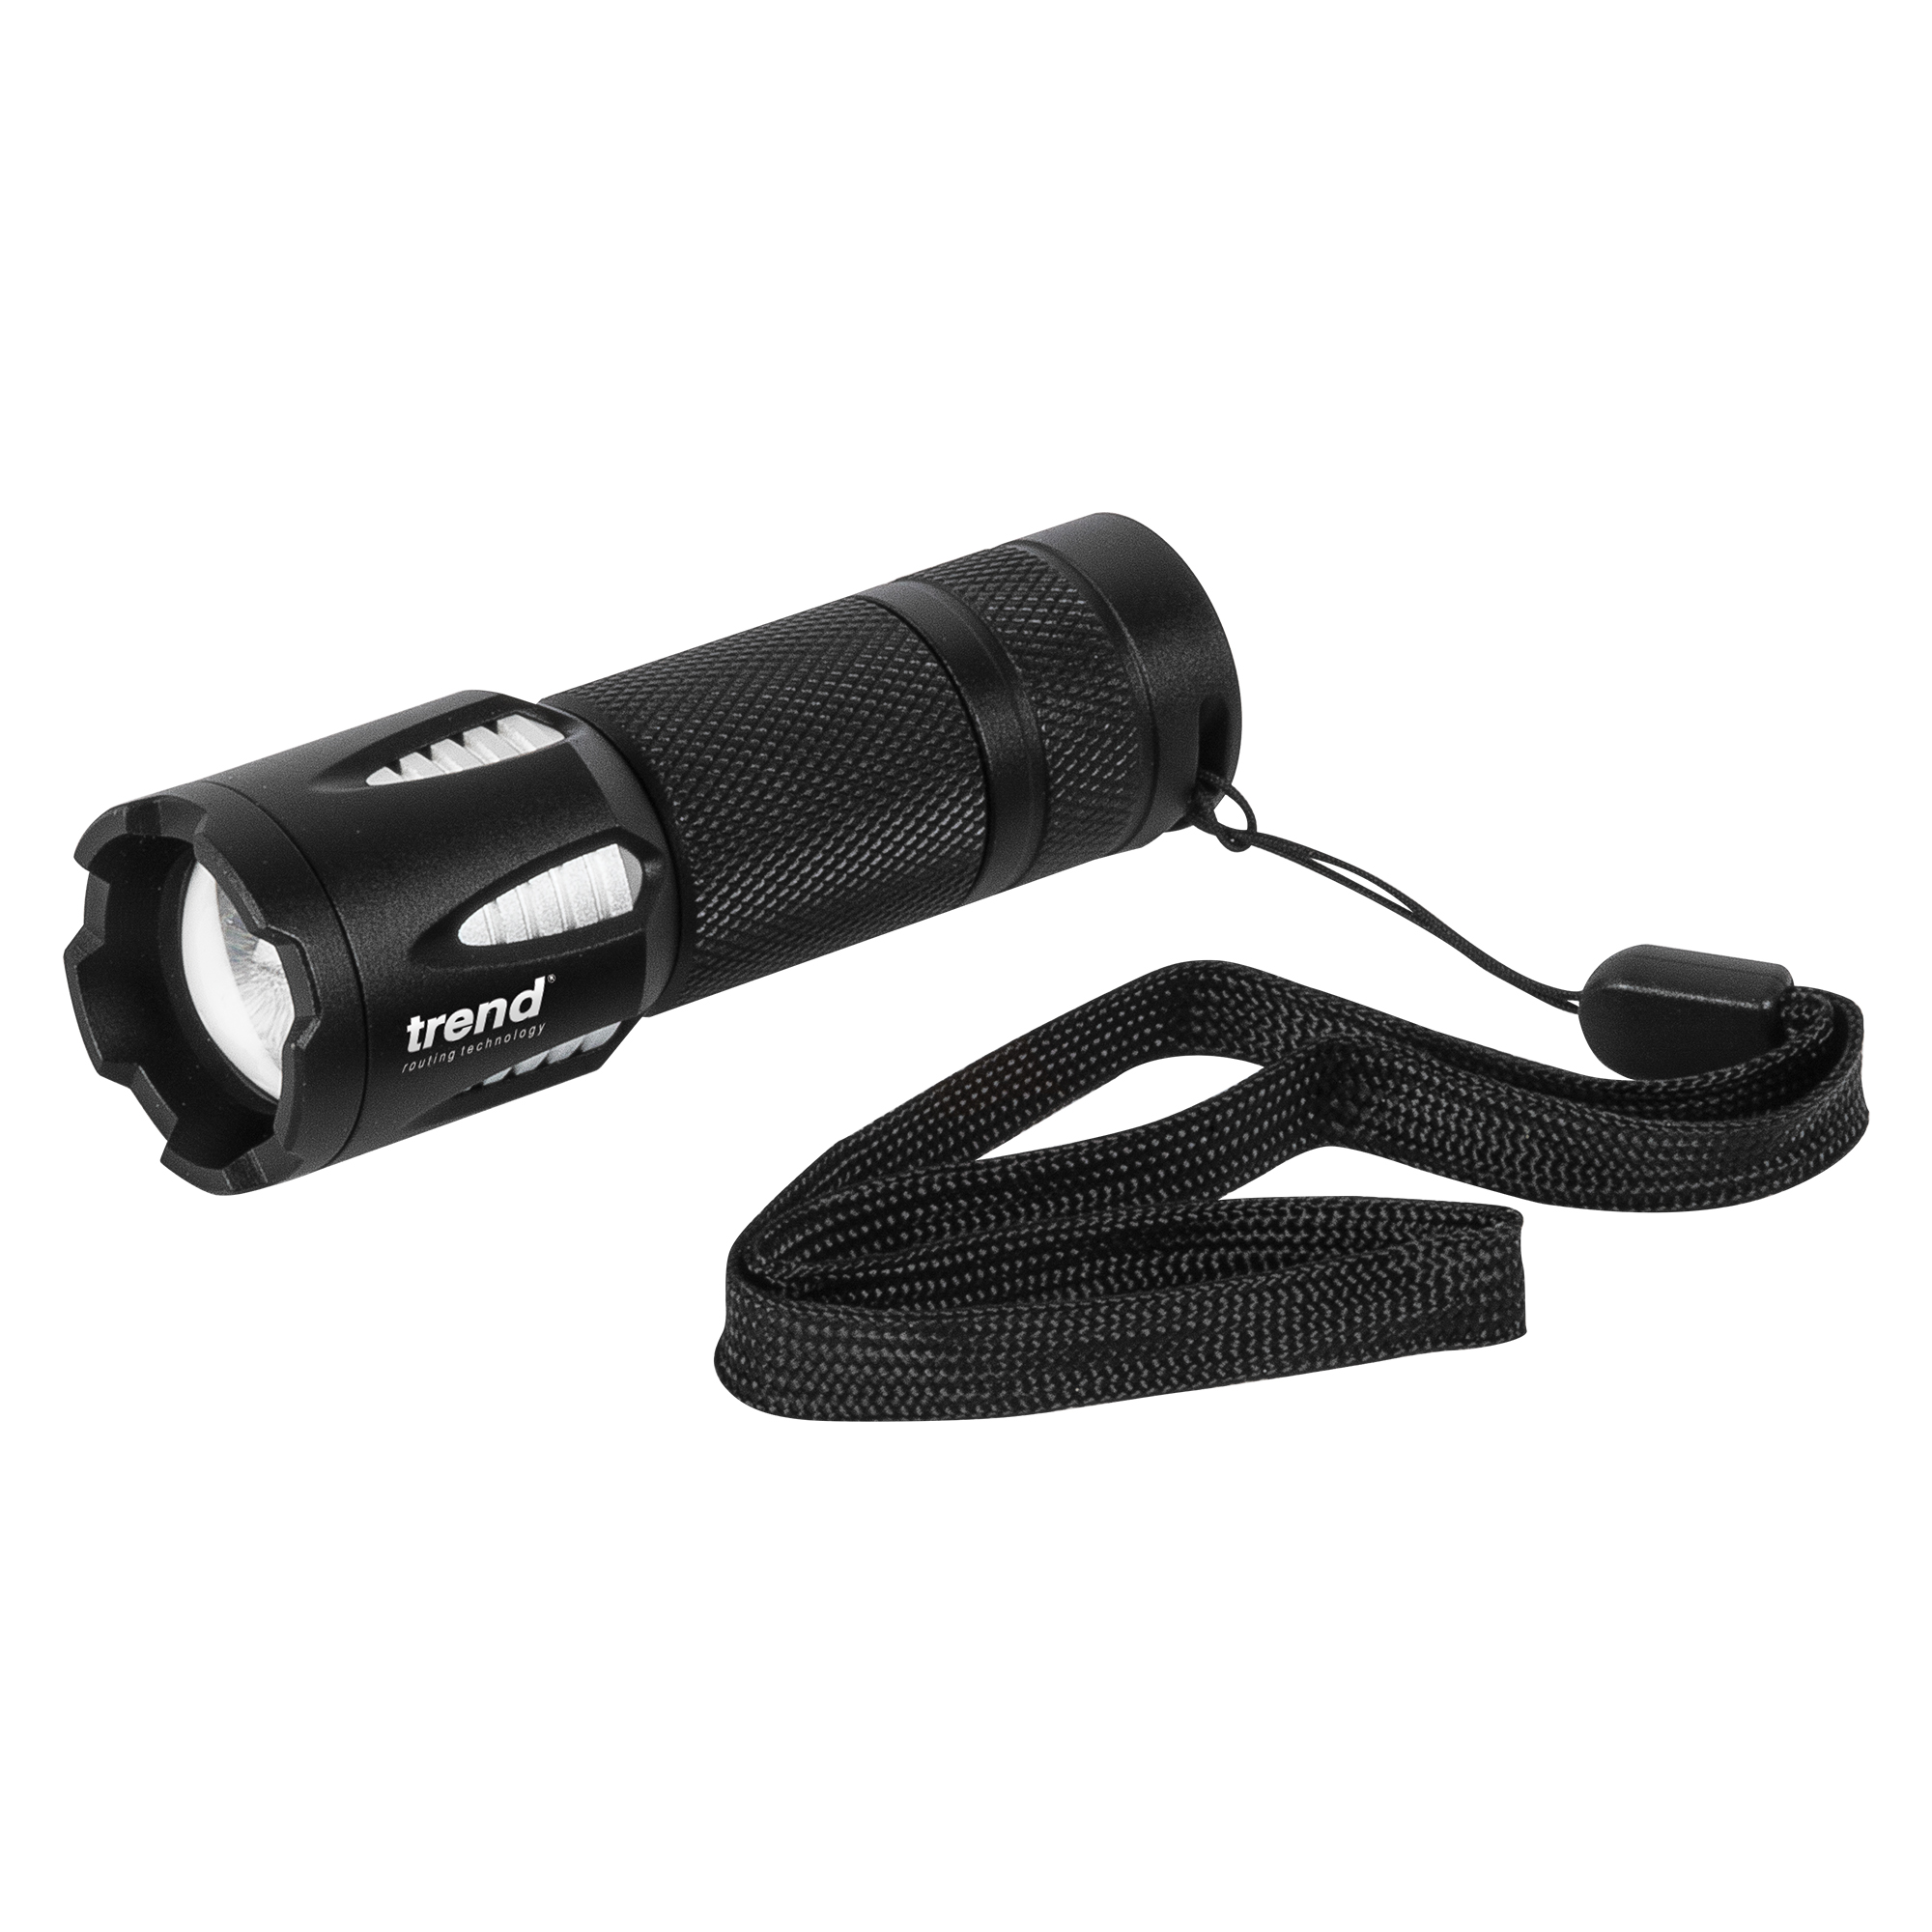 Torch Led Pocket Rechargeable 200 Lumens